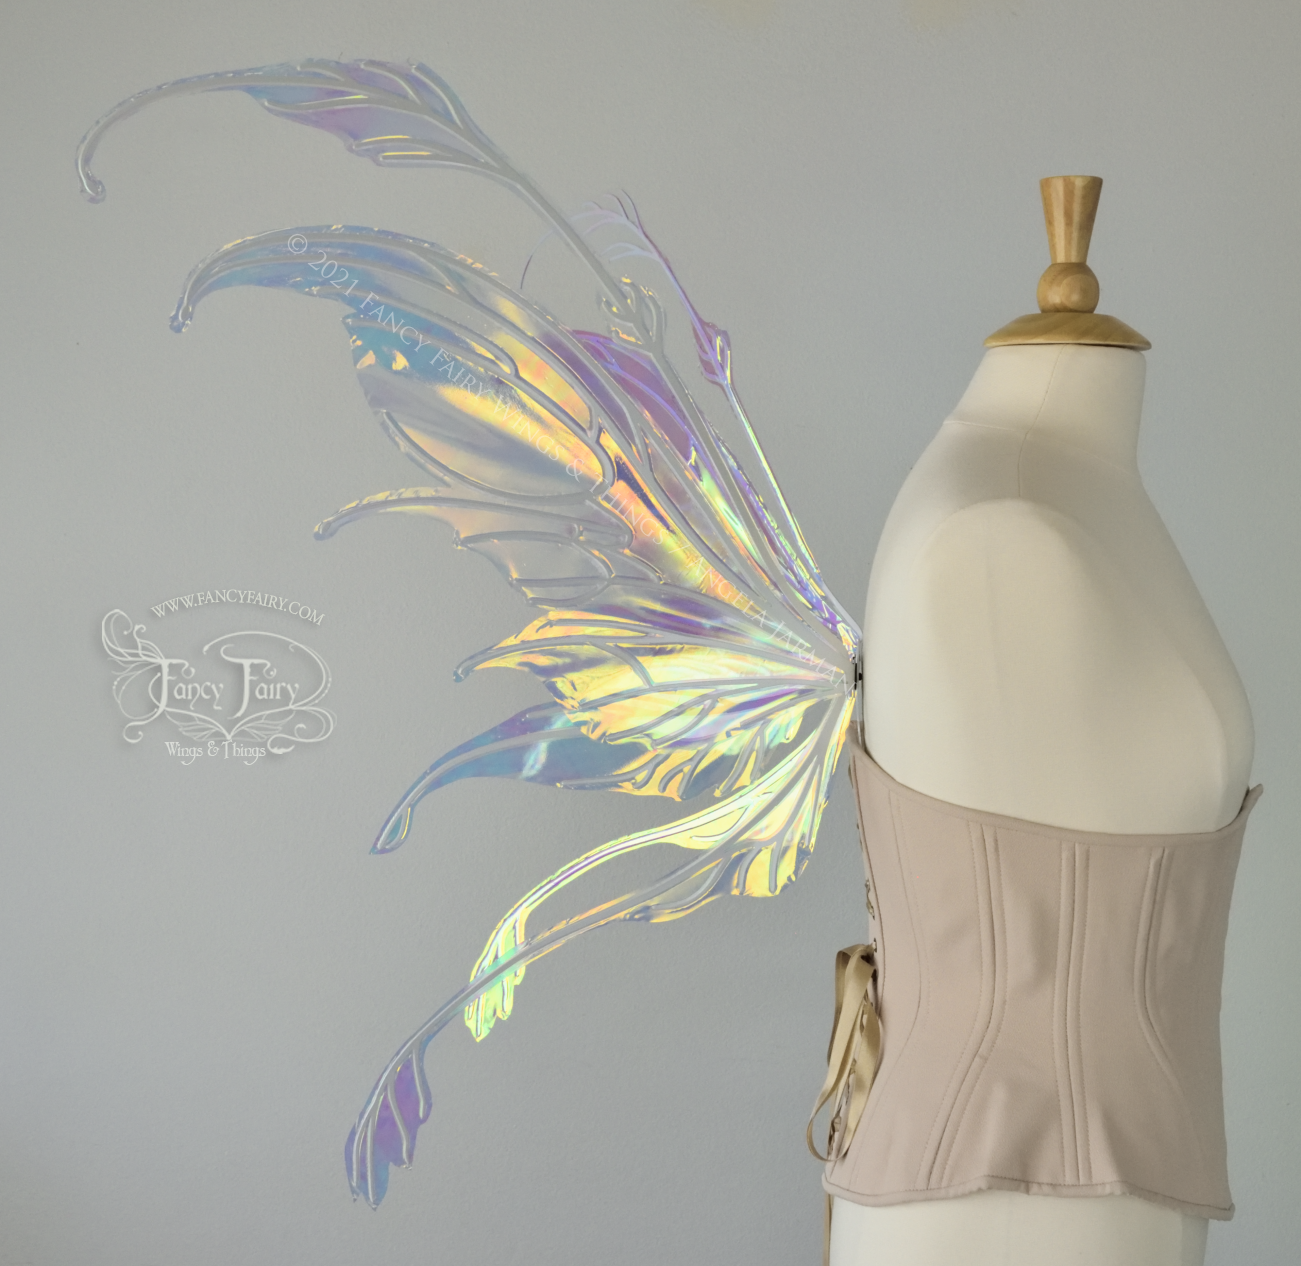 Fauna Iridescent Convertible Fairy Wings in Clear Diamond Fire with Pearl White veins